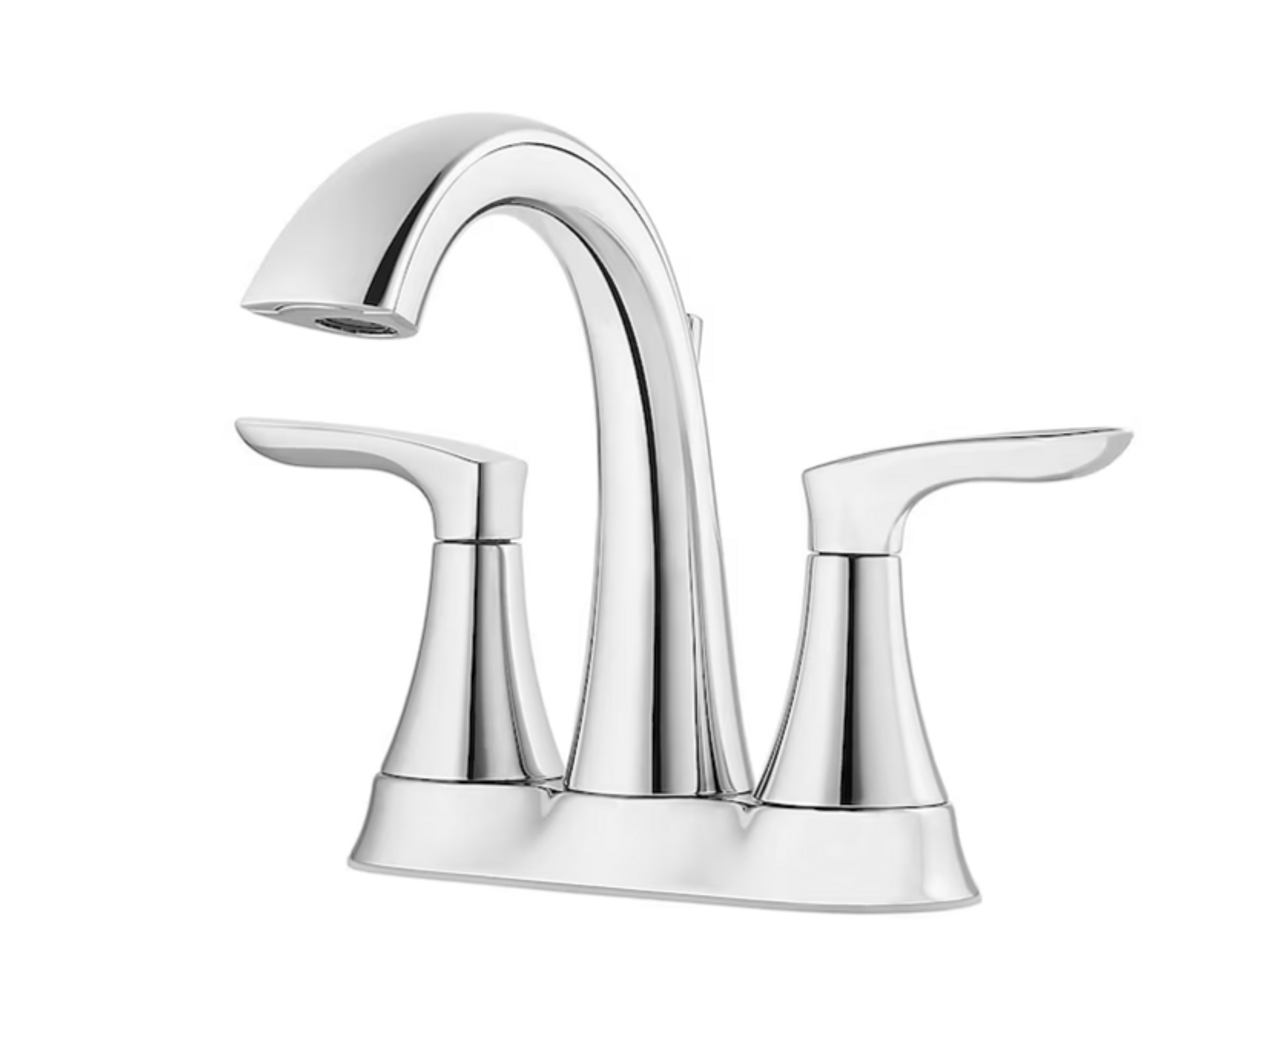 Pfister Weller Polished Chrome 2-handle 4-in Centerset WaterSense Bathroom Sink Faucet with Drain LG48-WR0C